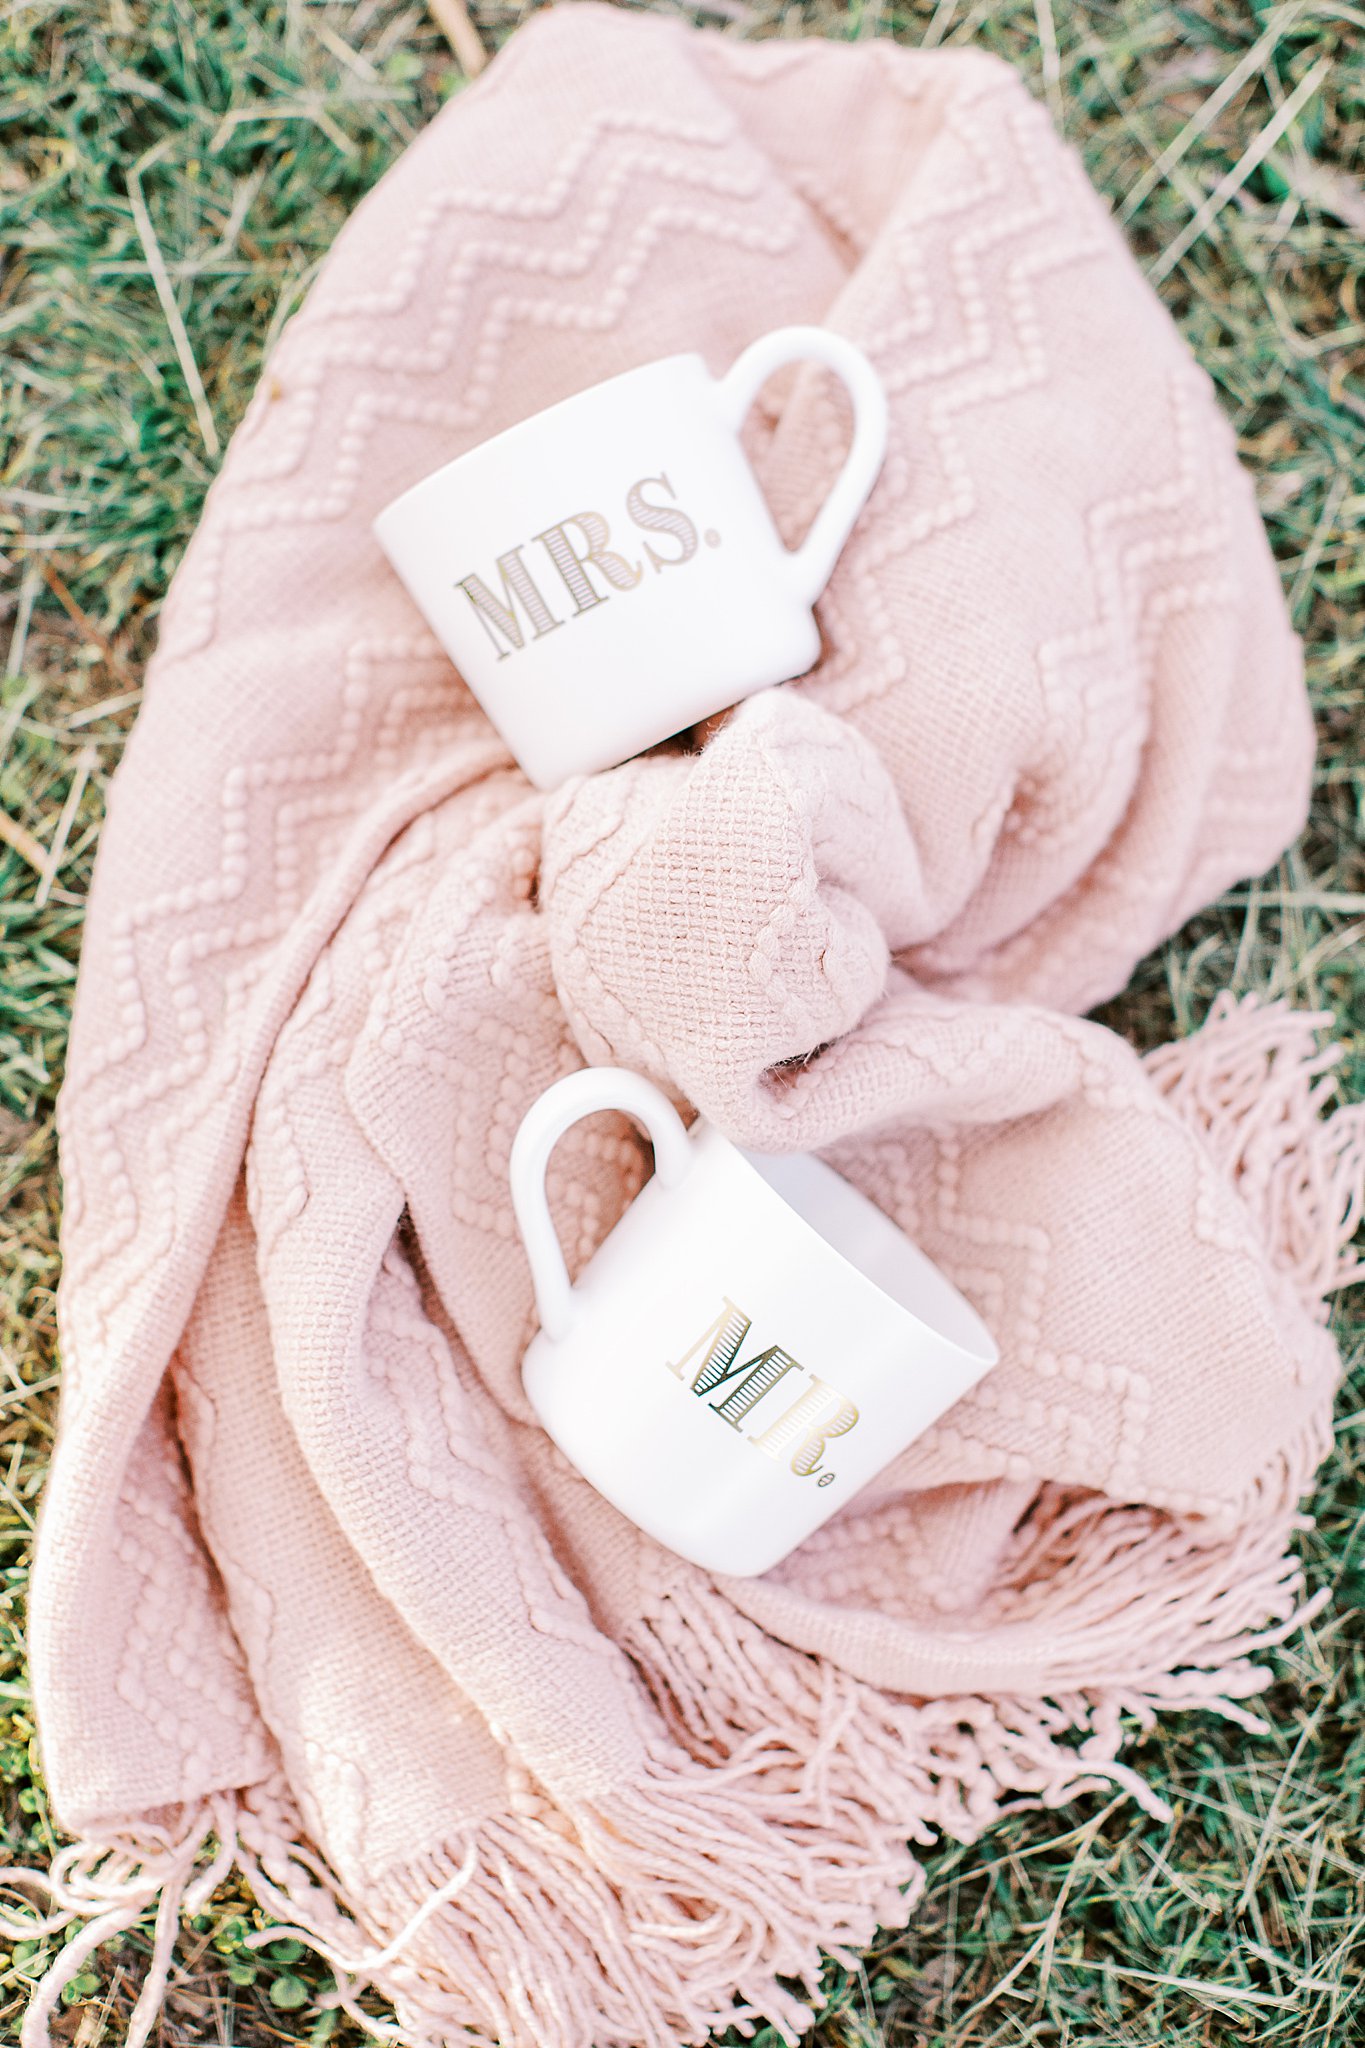 Mr. and Mrs. Coffee Mugs captured by Anna Kay Photography